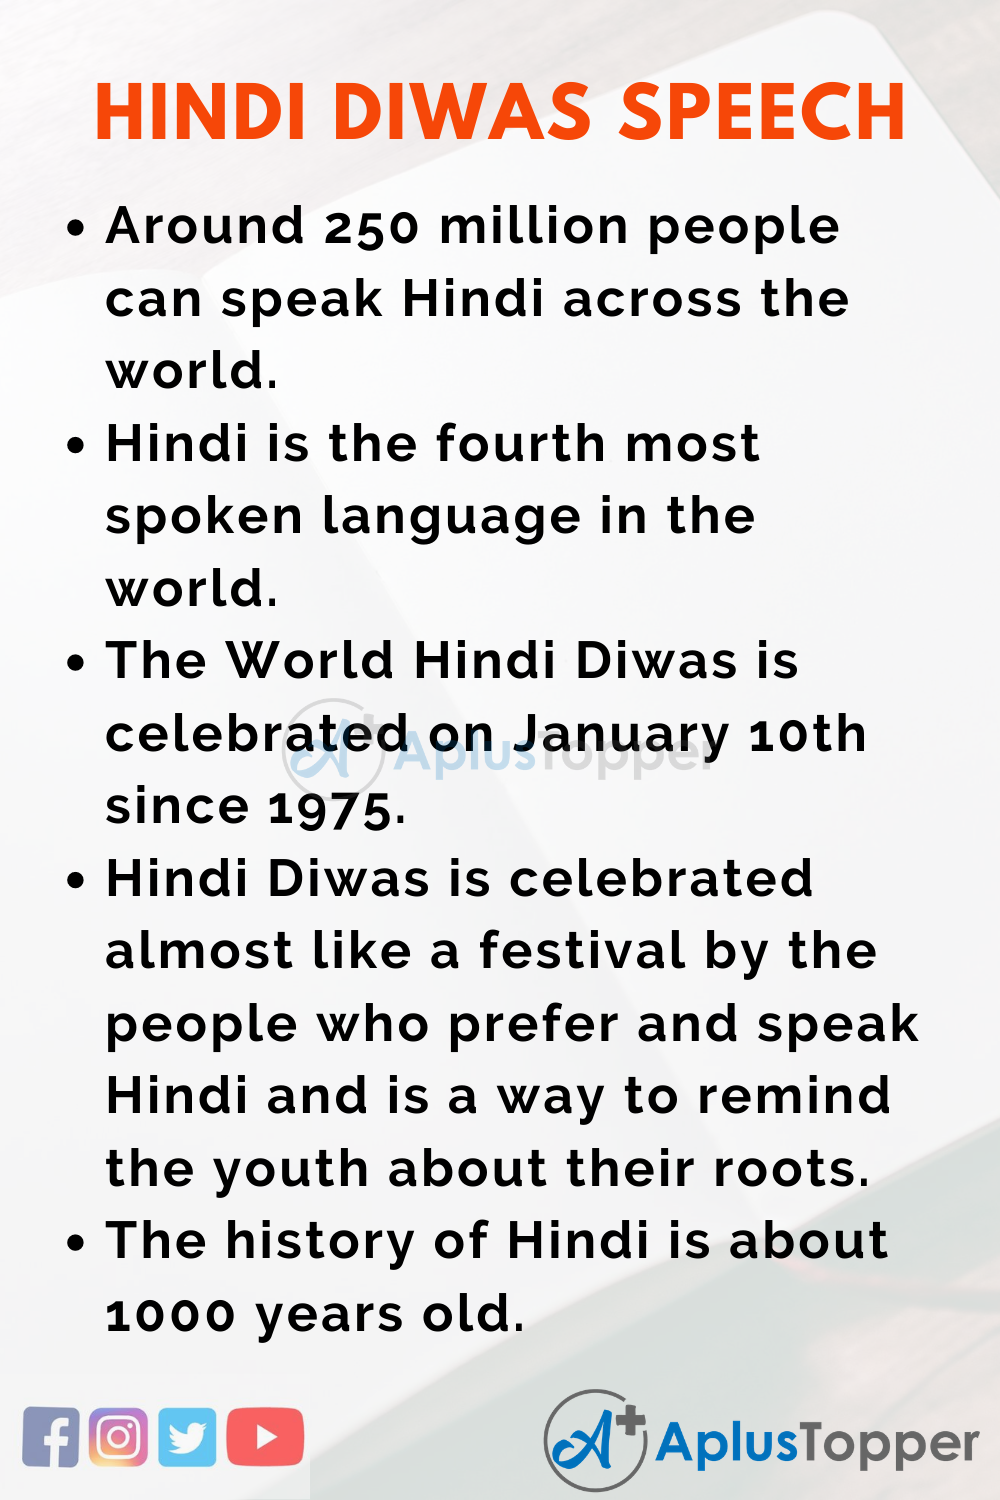 speech by hindi meaning